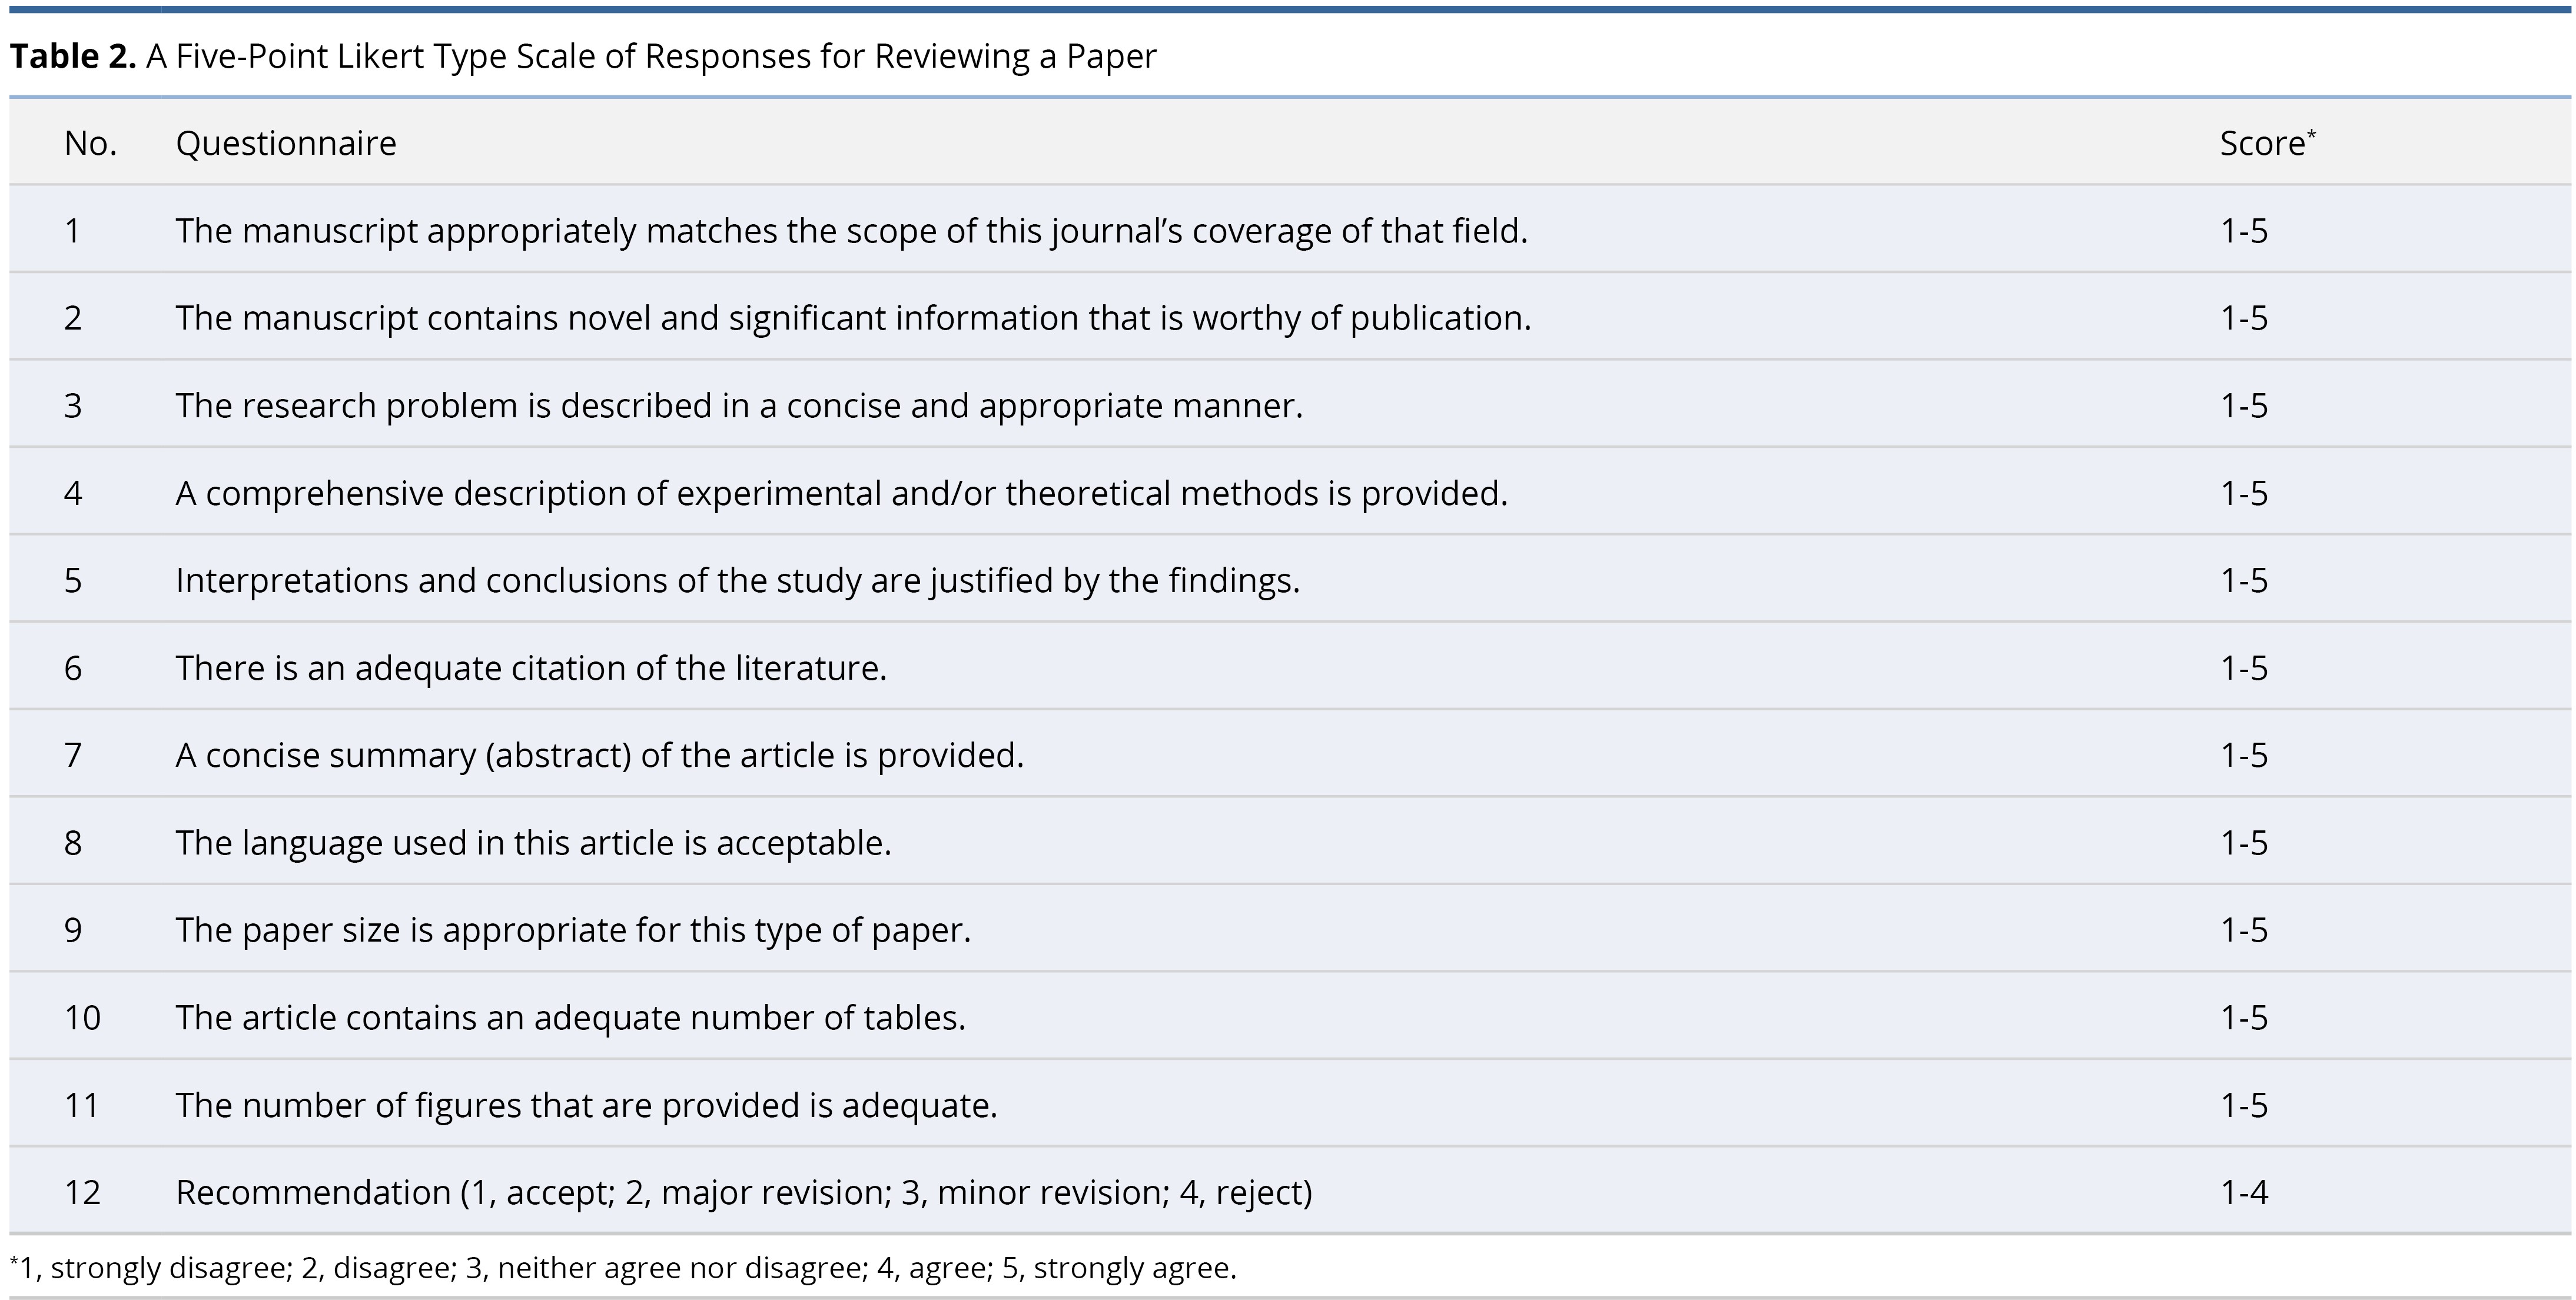 Table 2.jpgA Five-Point Likert Type Scale of Responses for Reviewing a Paper